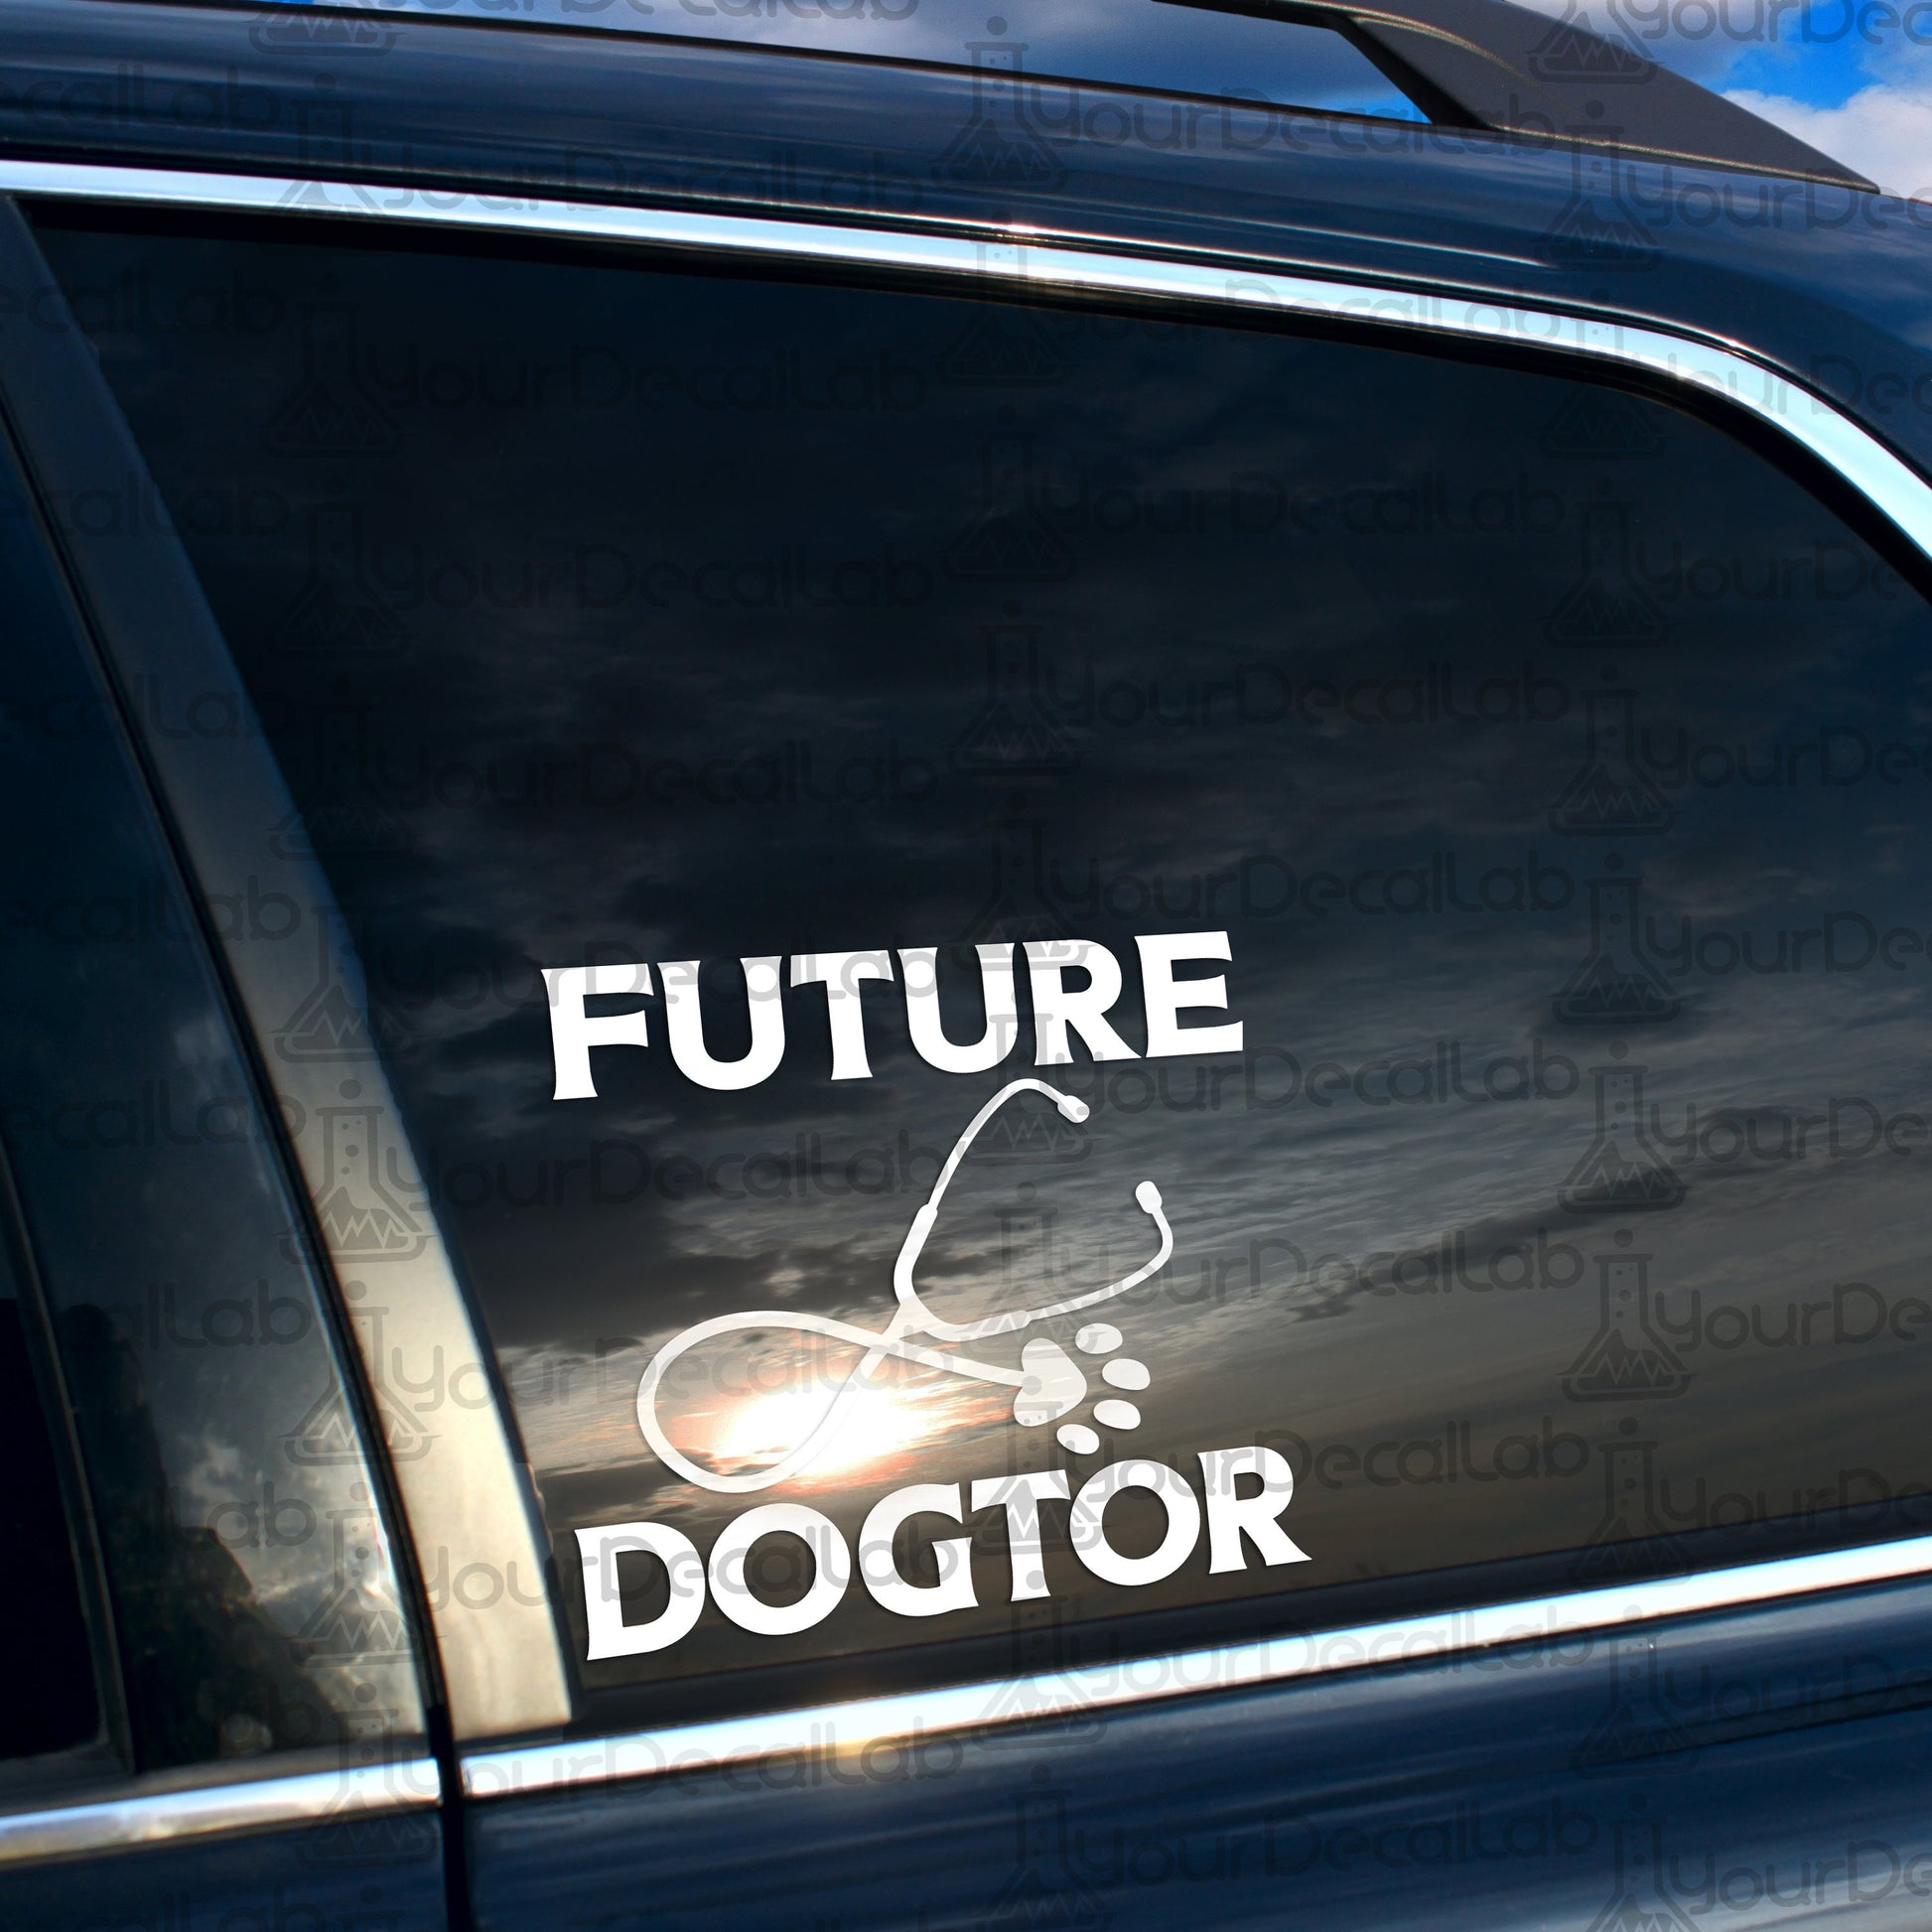 a sticker on the side of a car that says future doctor